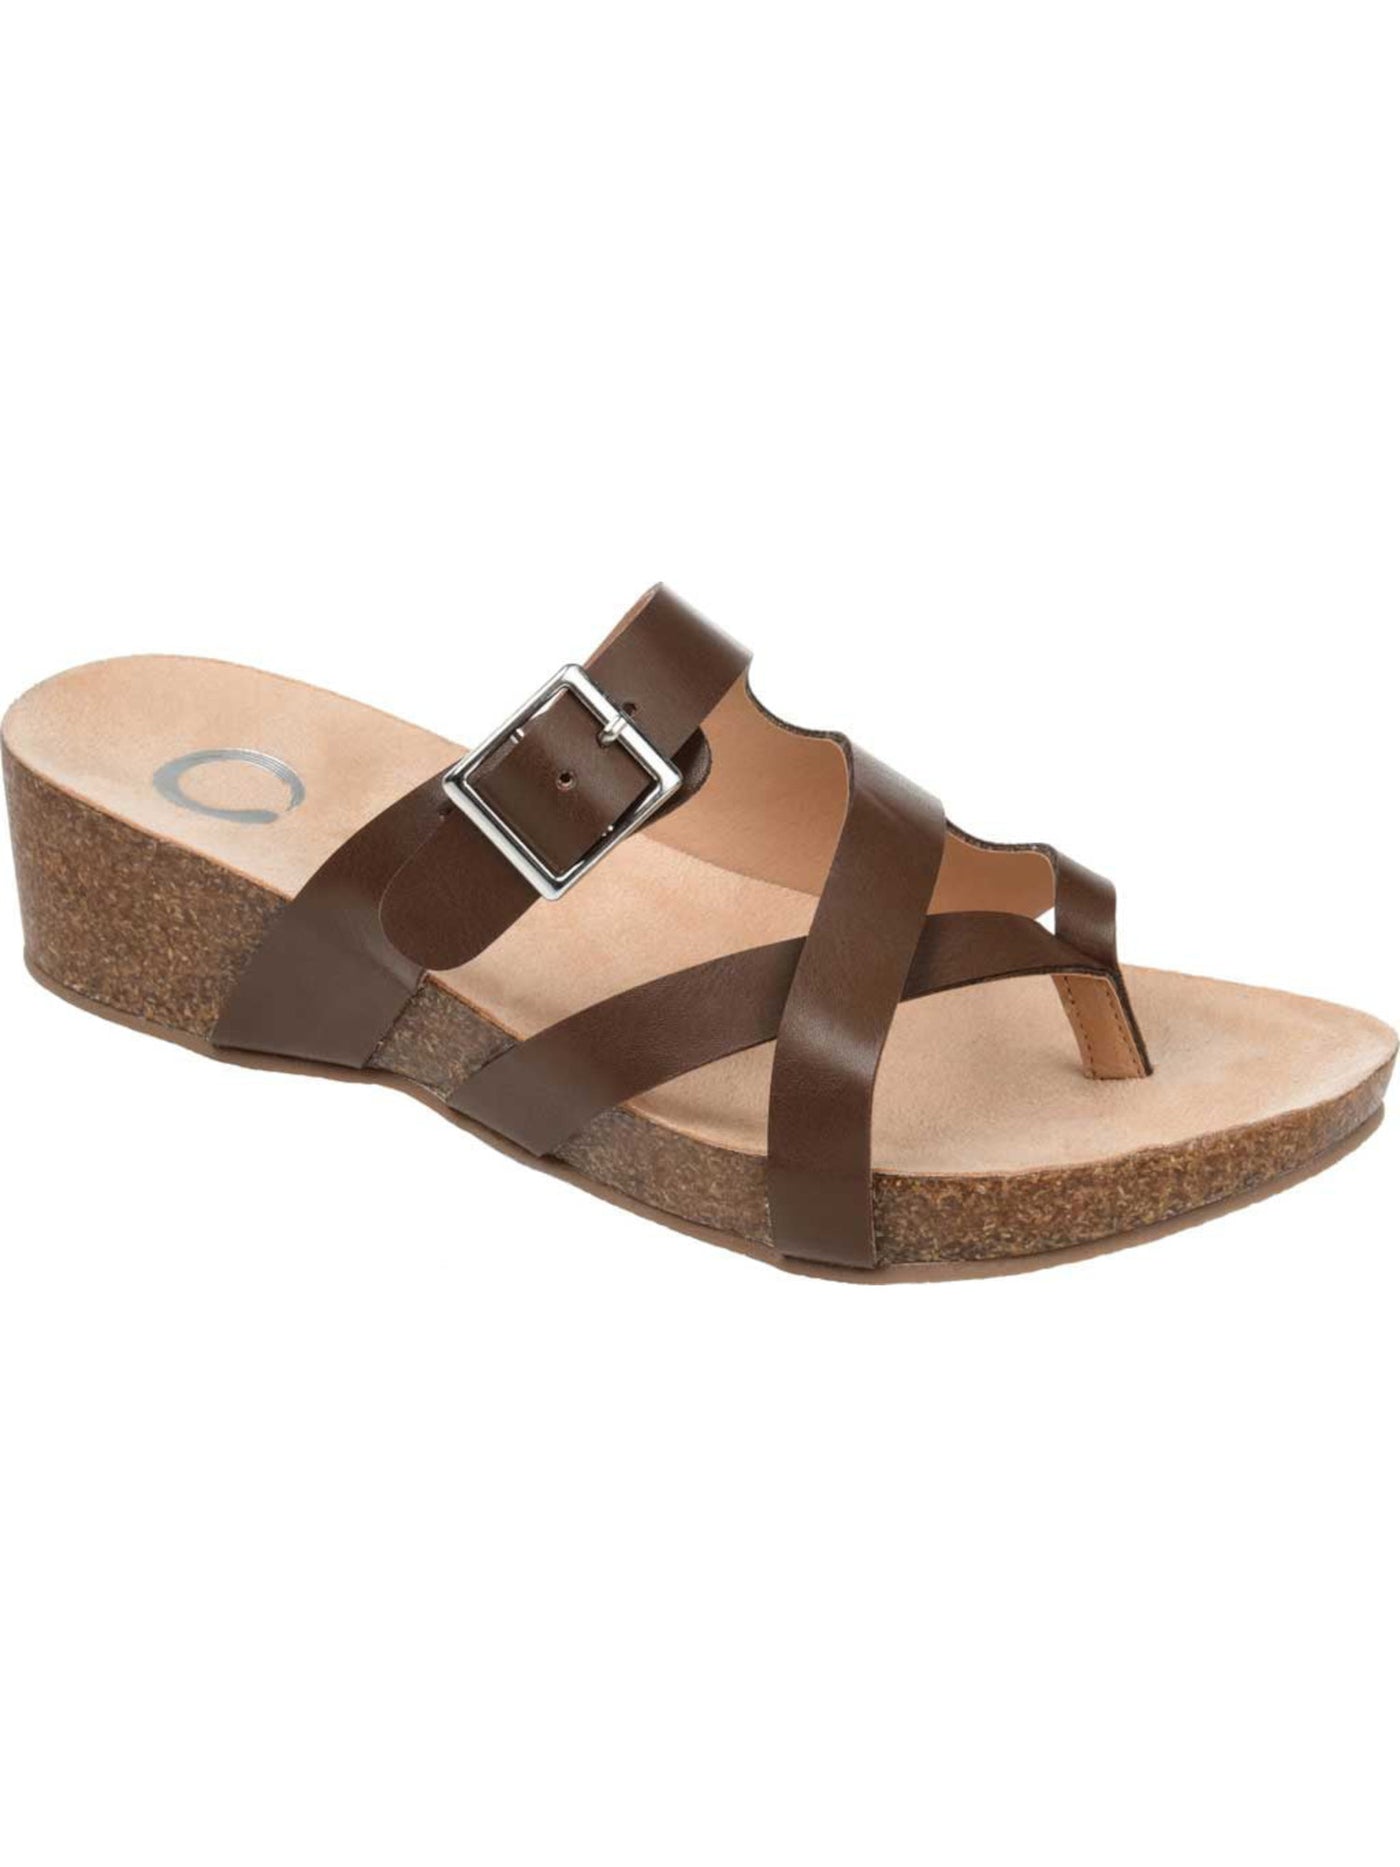 JOURNEE COLLECTION Womens Brown 1/2" Platform Crossover Straps Buckle Strappy Comfort Madrid Round Toe Wedge Slip On Thong Sandals Shoes 7.5 M